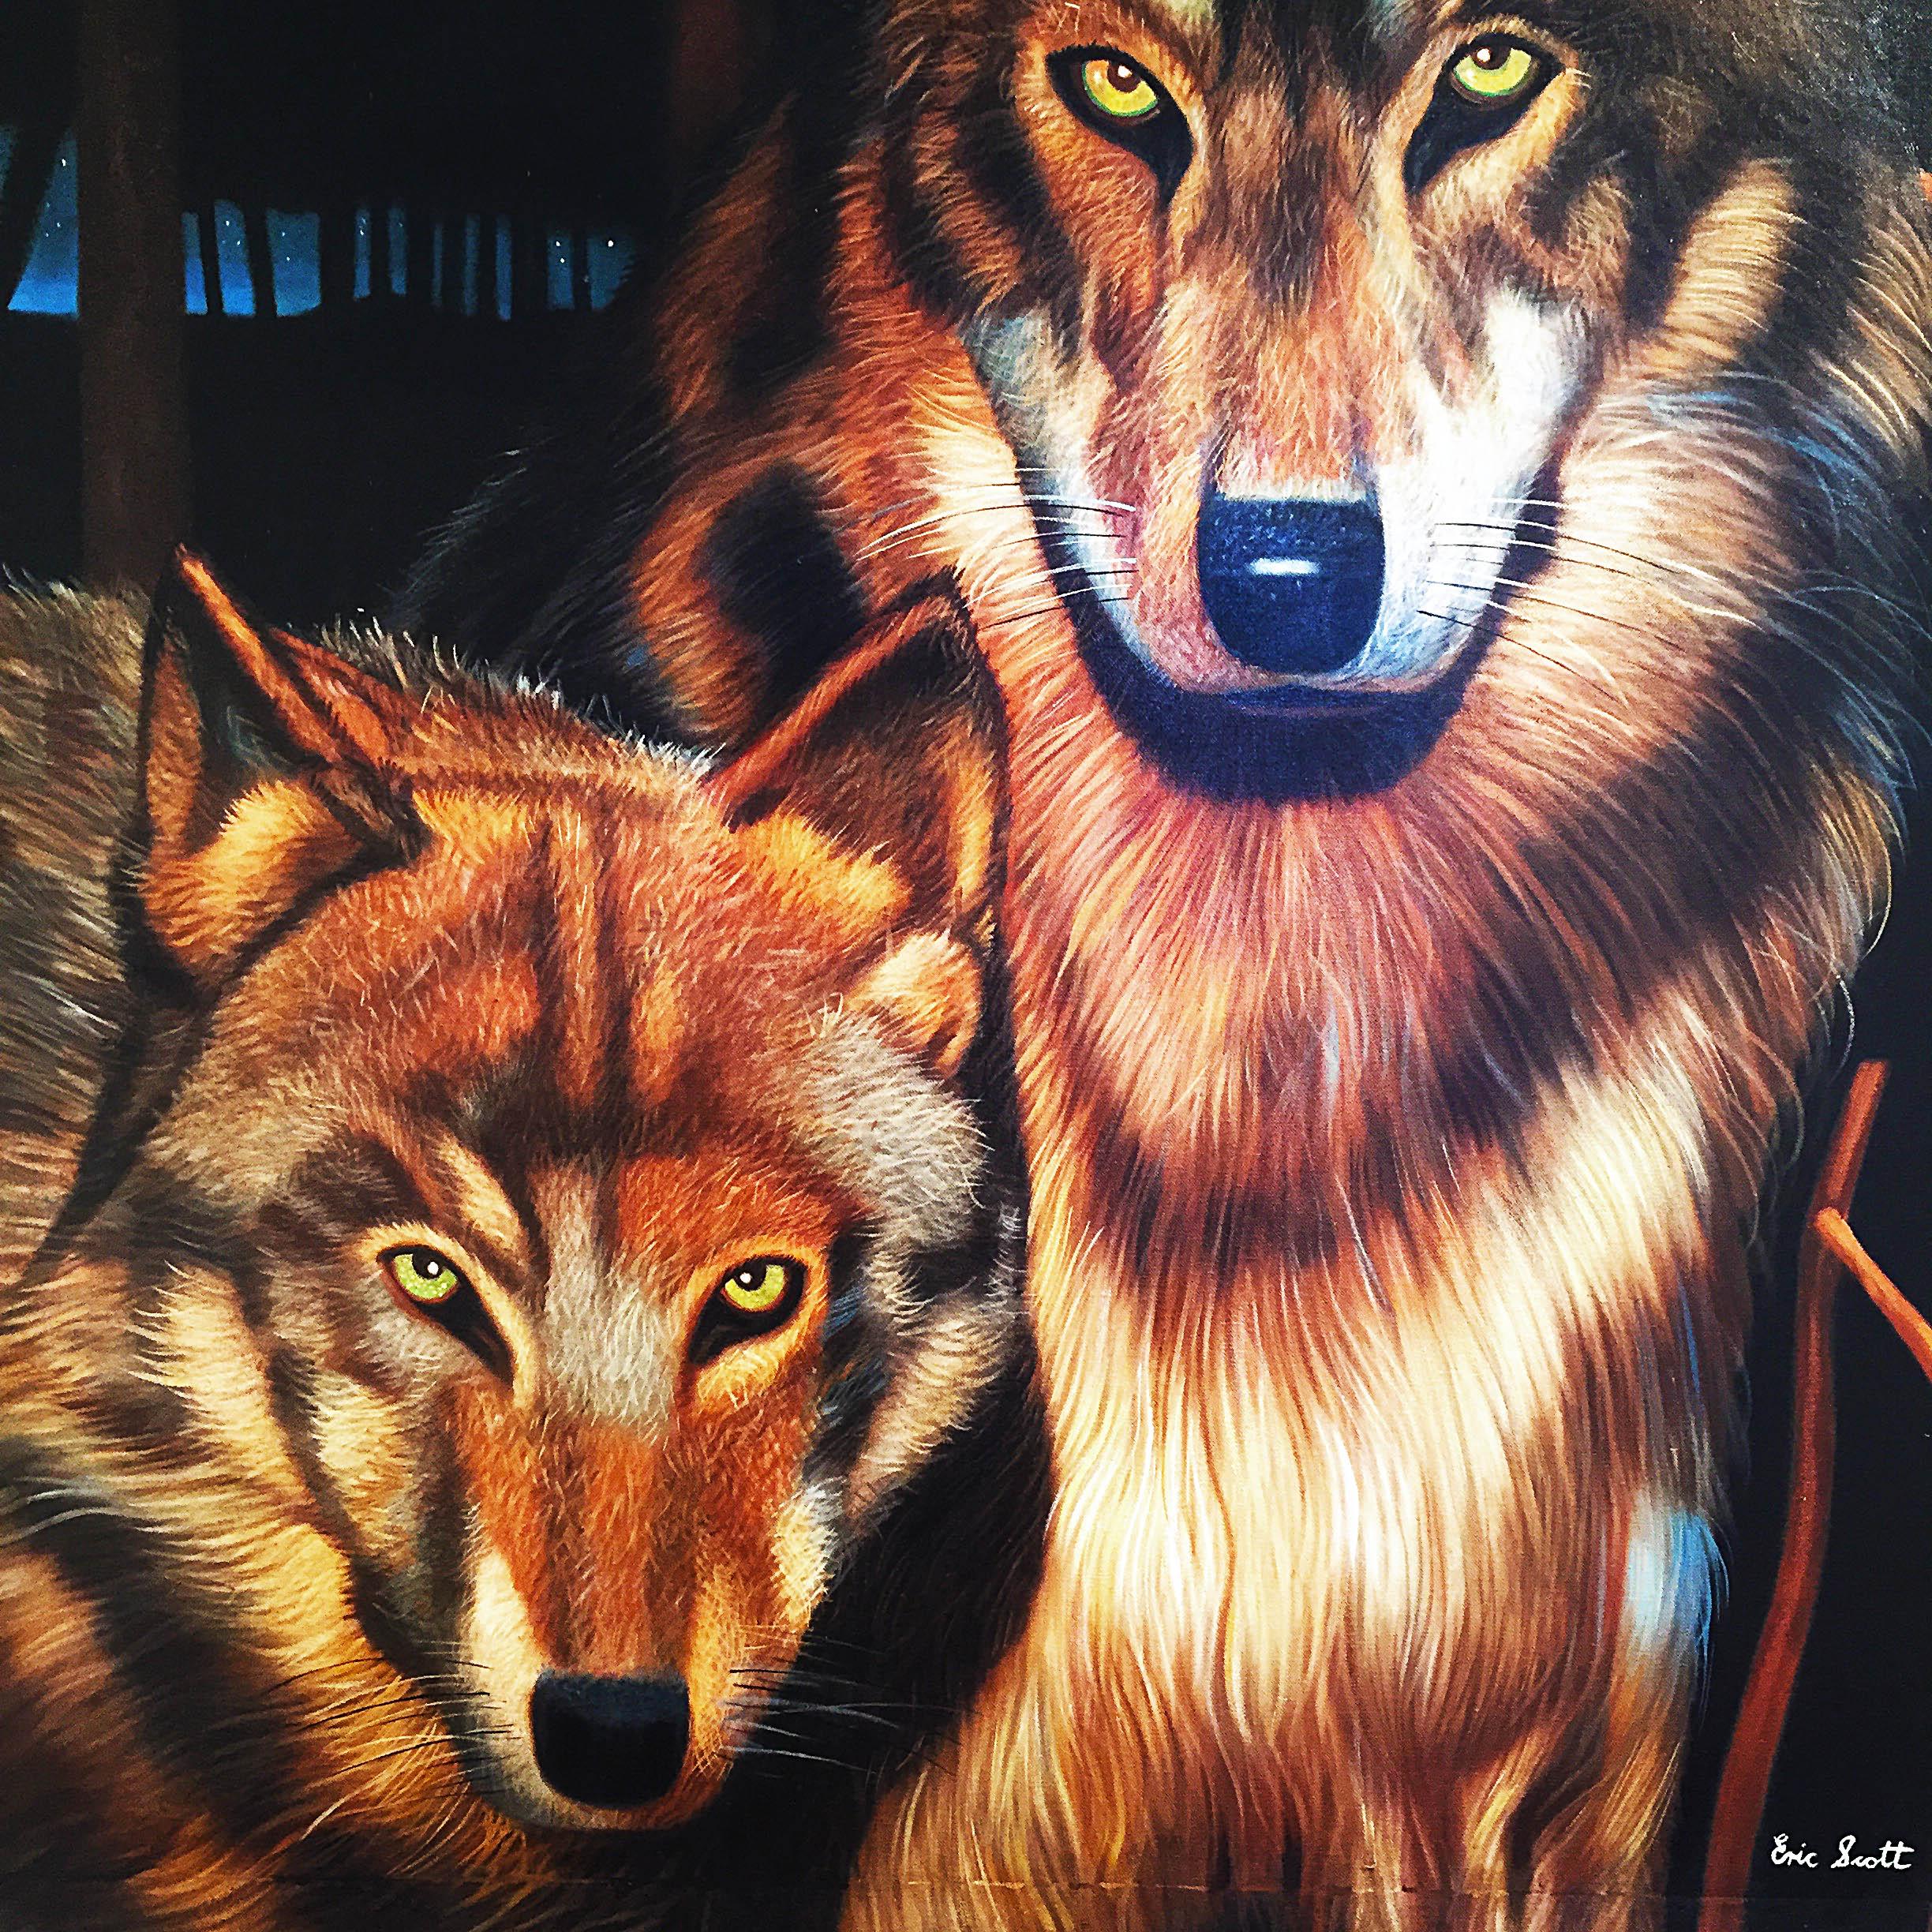 This impressive and captivating oil-on-canvas of hyperrealistic wolves is by the talented British artist Eric Scott (1945-2005), brother of the late Colin Scott. Eric Scott’s artworks almost always features subjects that are entirely out of